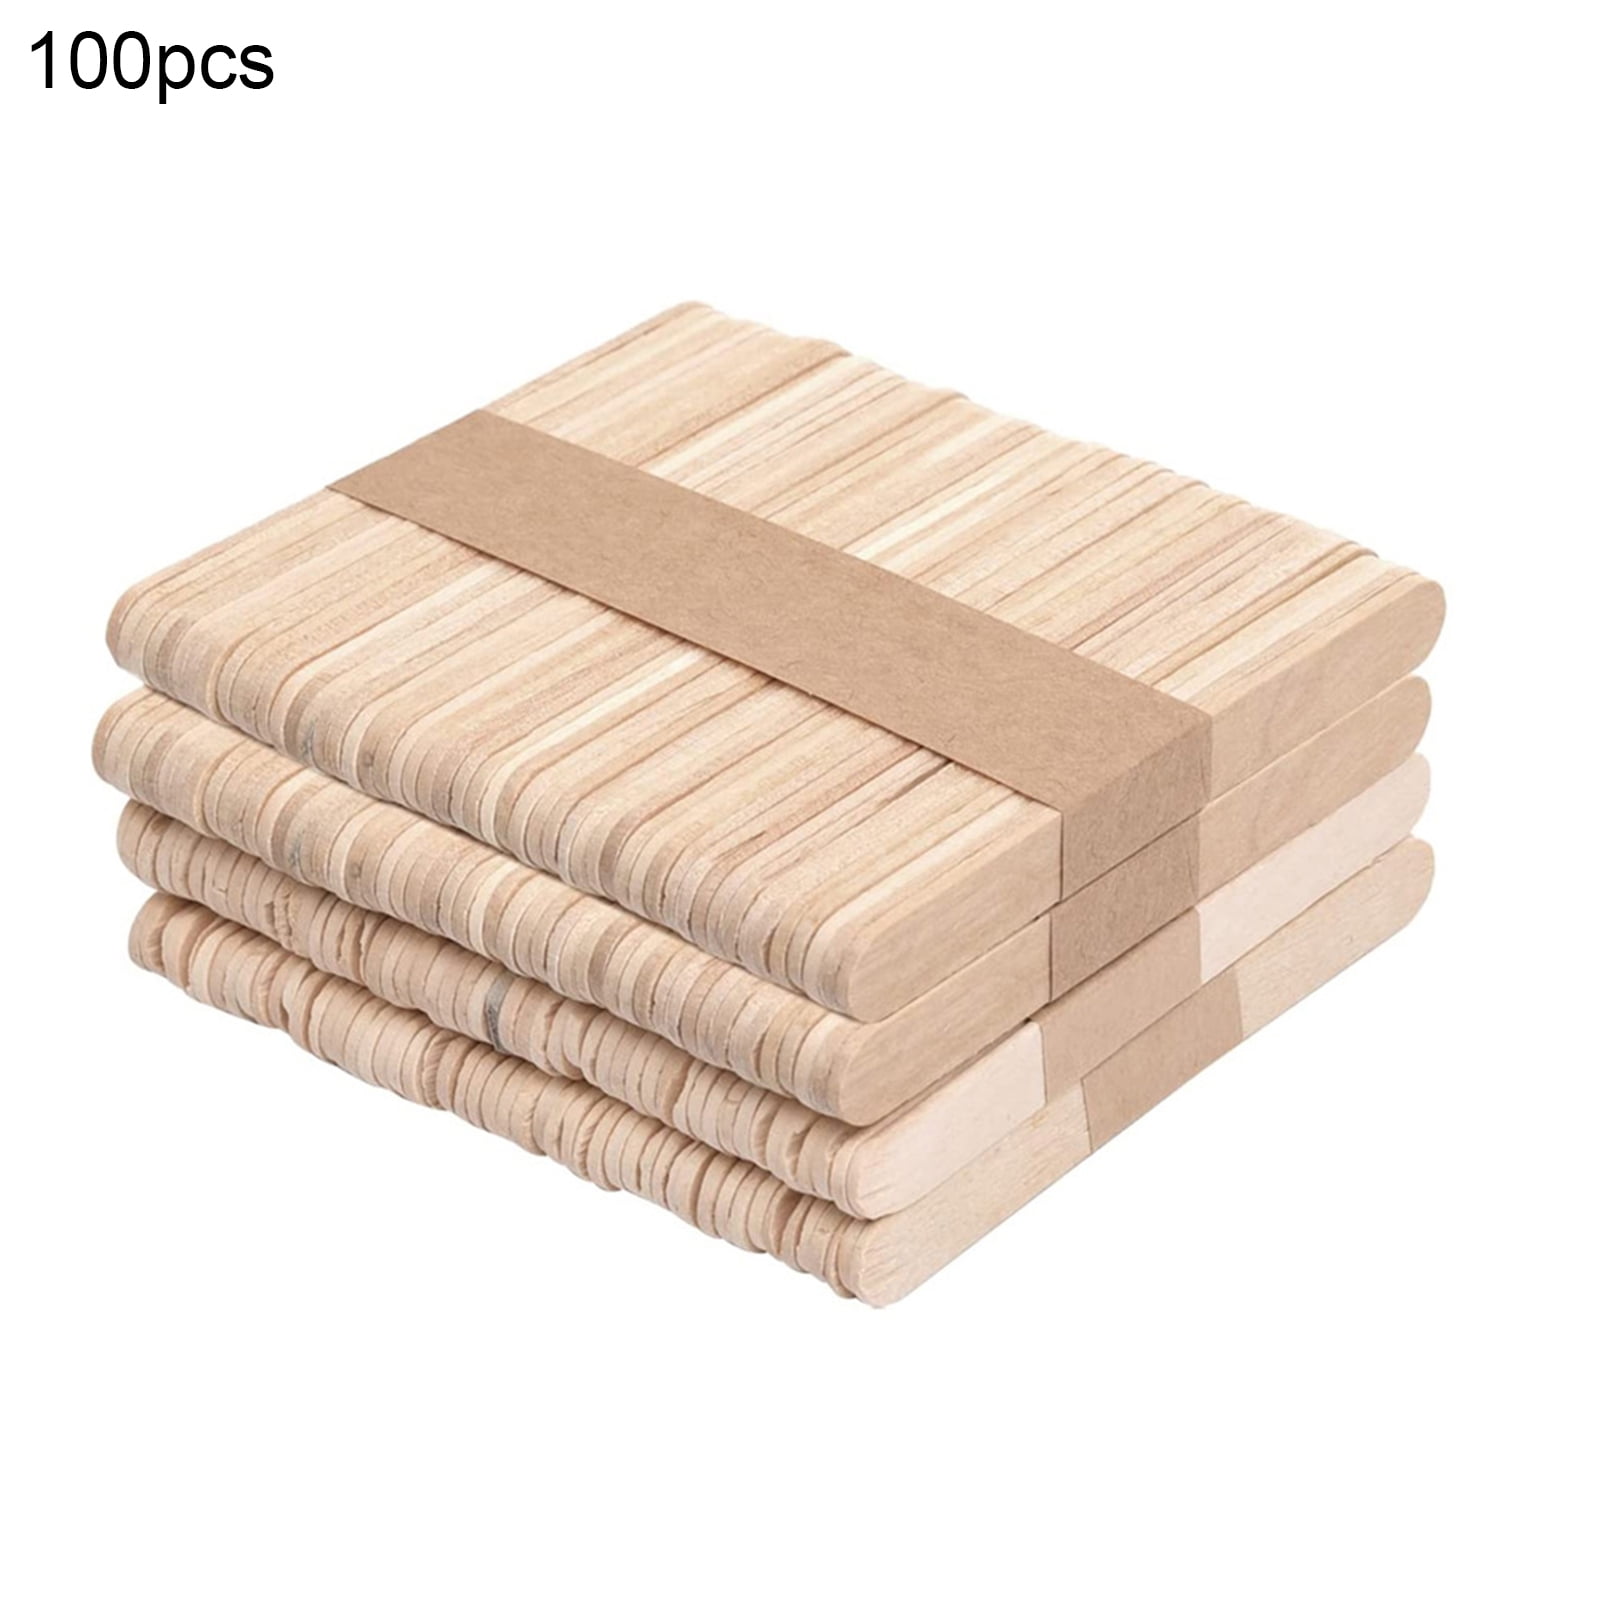 Trayknick Back School,100Pcs Ice Cream Sticks Food Grade Solid Construction  Wood Wooden Popsicle Sticks DIY Crafts Accessories for Home 